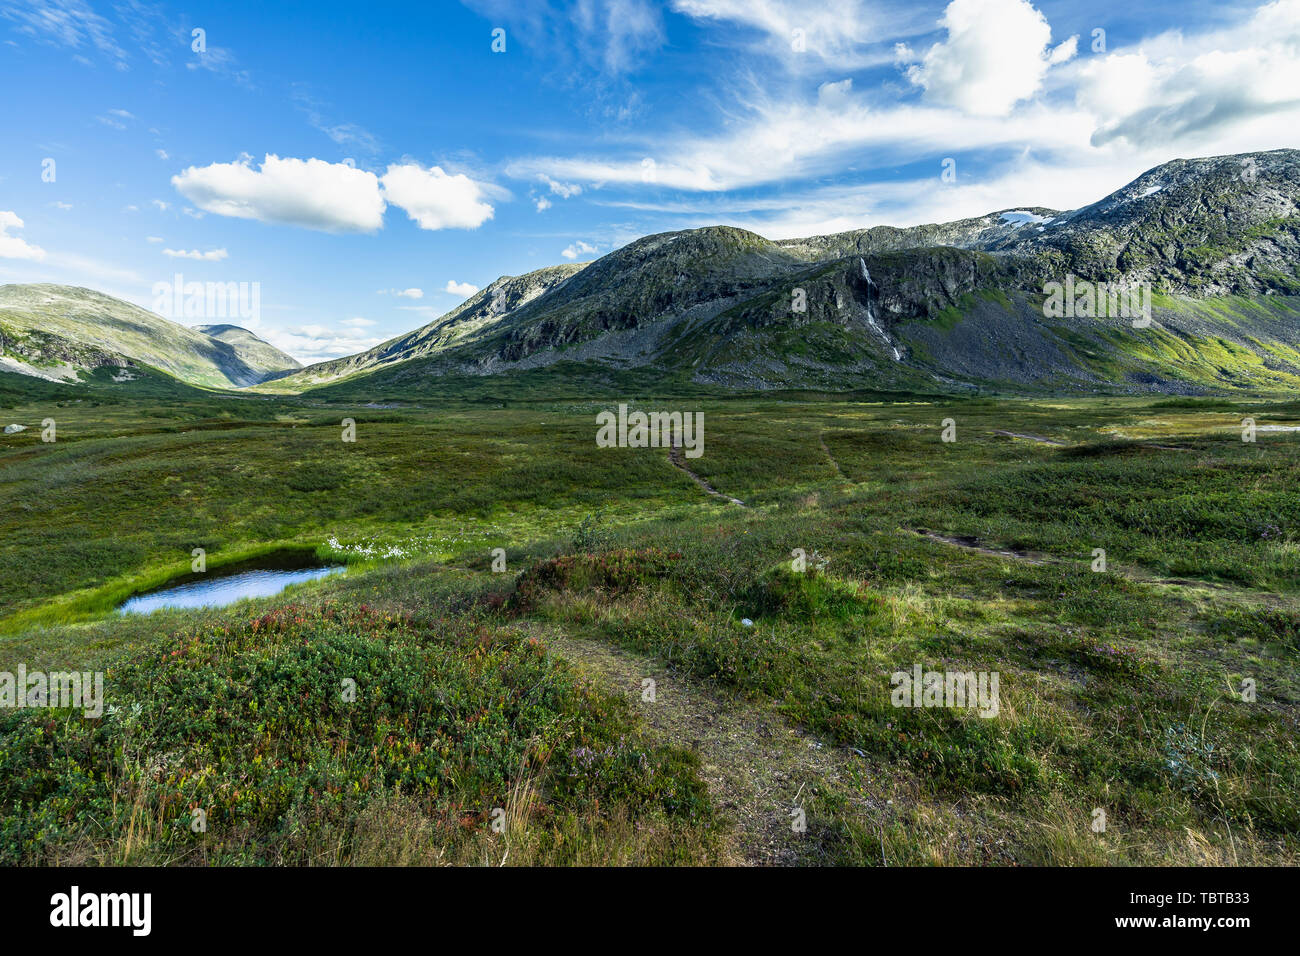 Landscape and nature at the upper part of the Valldalen Valley towards Trollstigen, Sunnmore, More og Romsdal, Norway Stock Photo